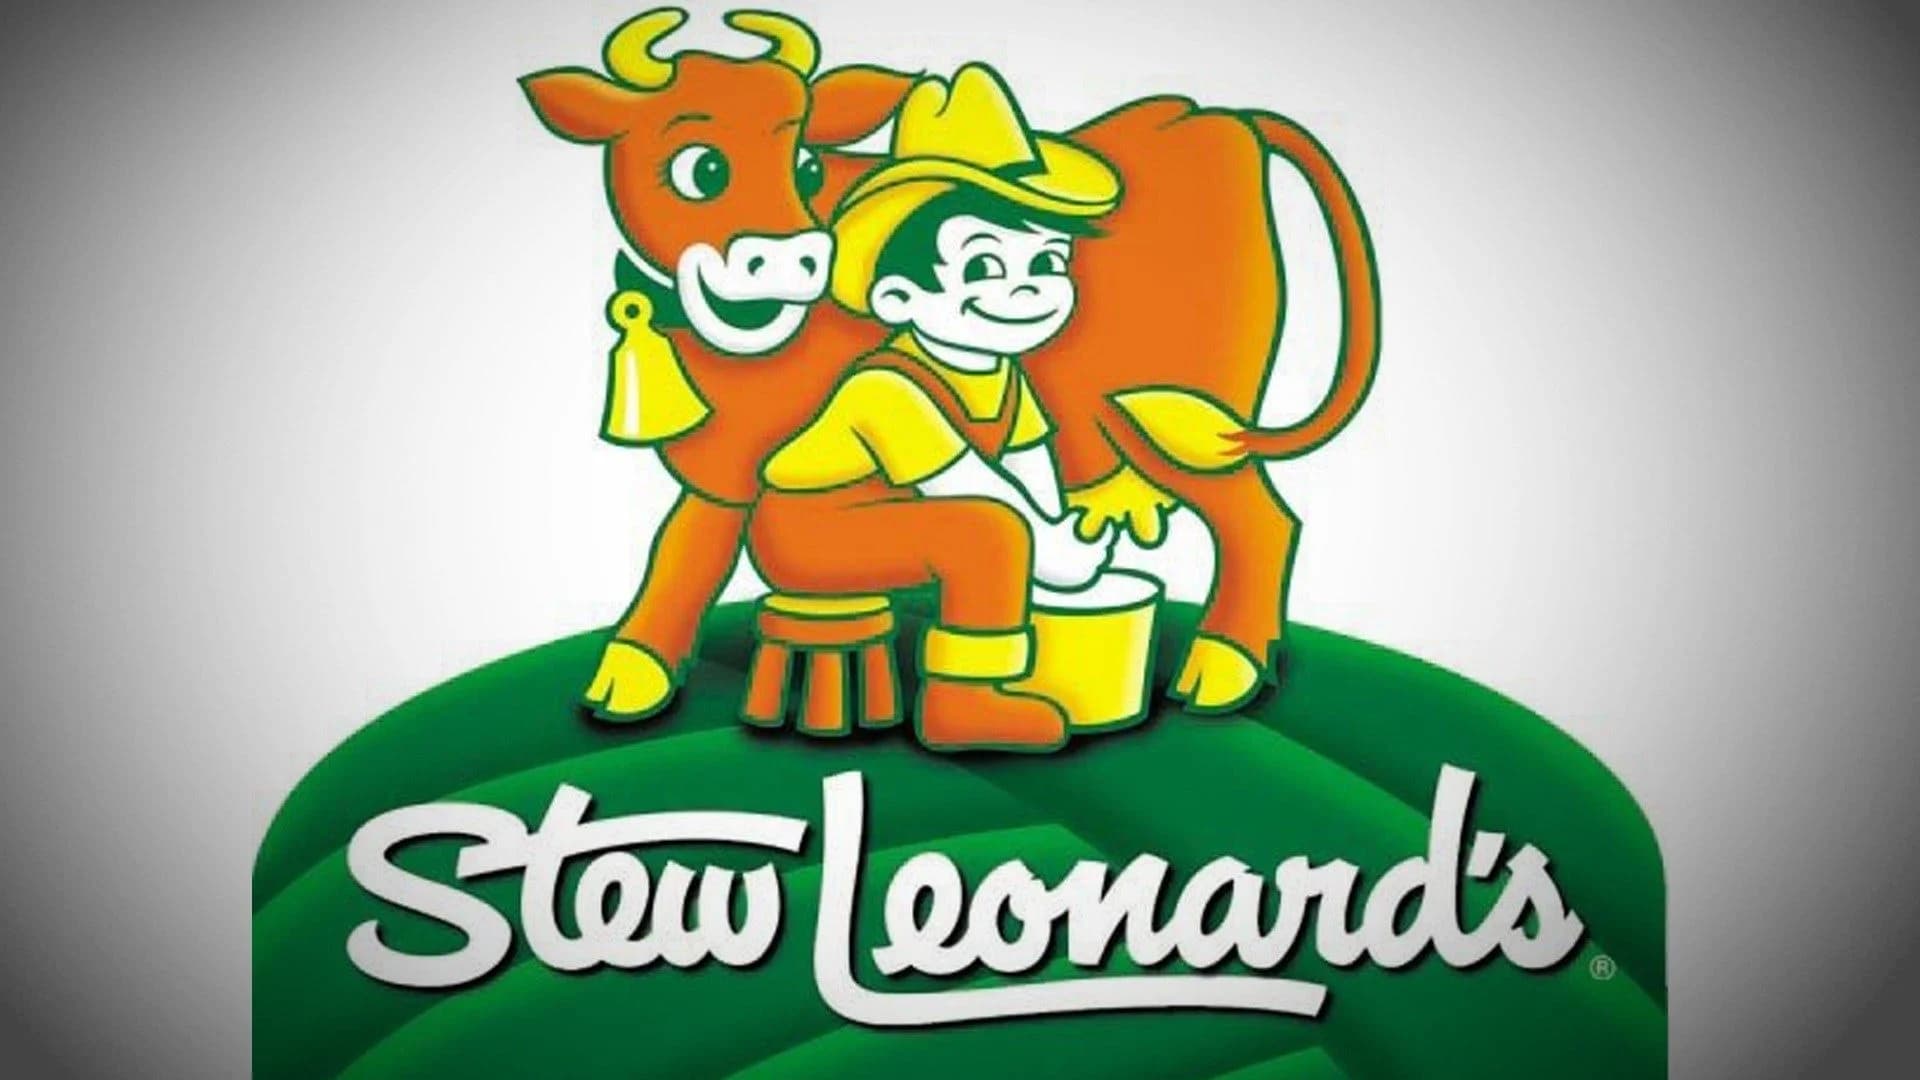 Hundreds of jobs coming: Stew Leonard's to open first New Jersey grocery store